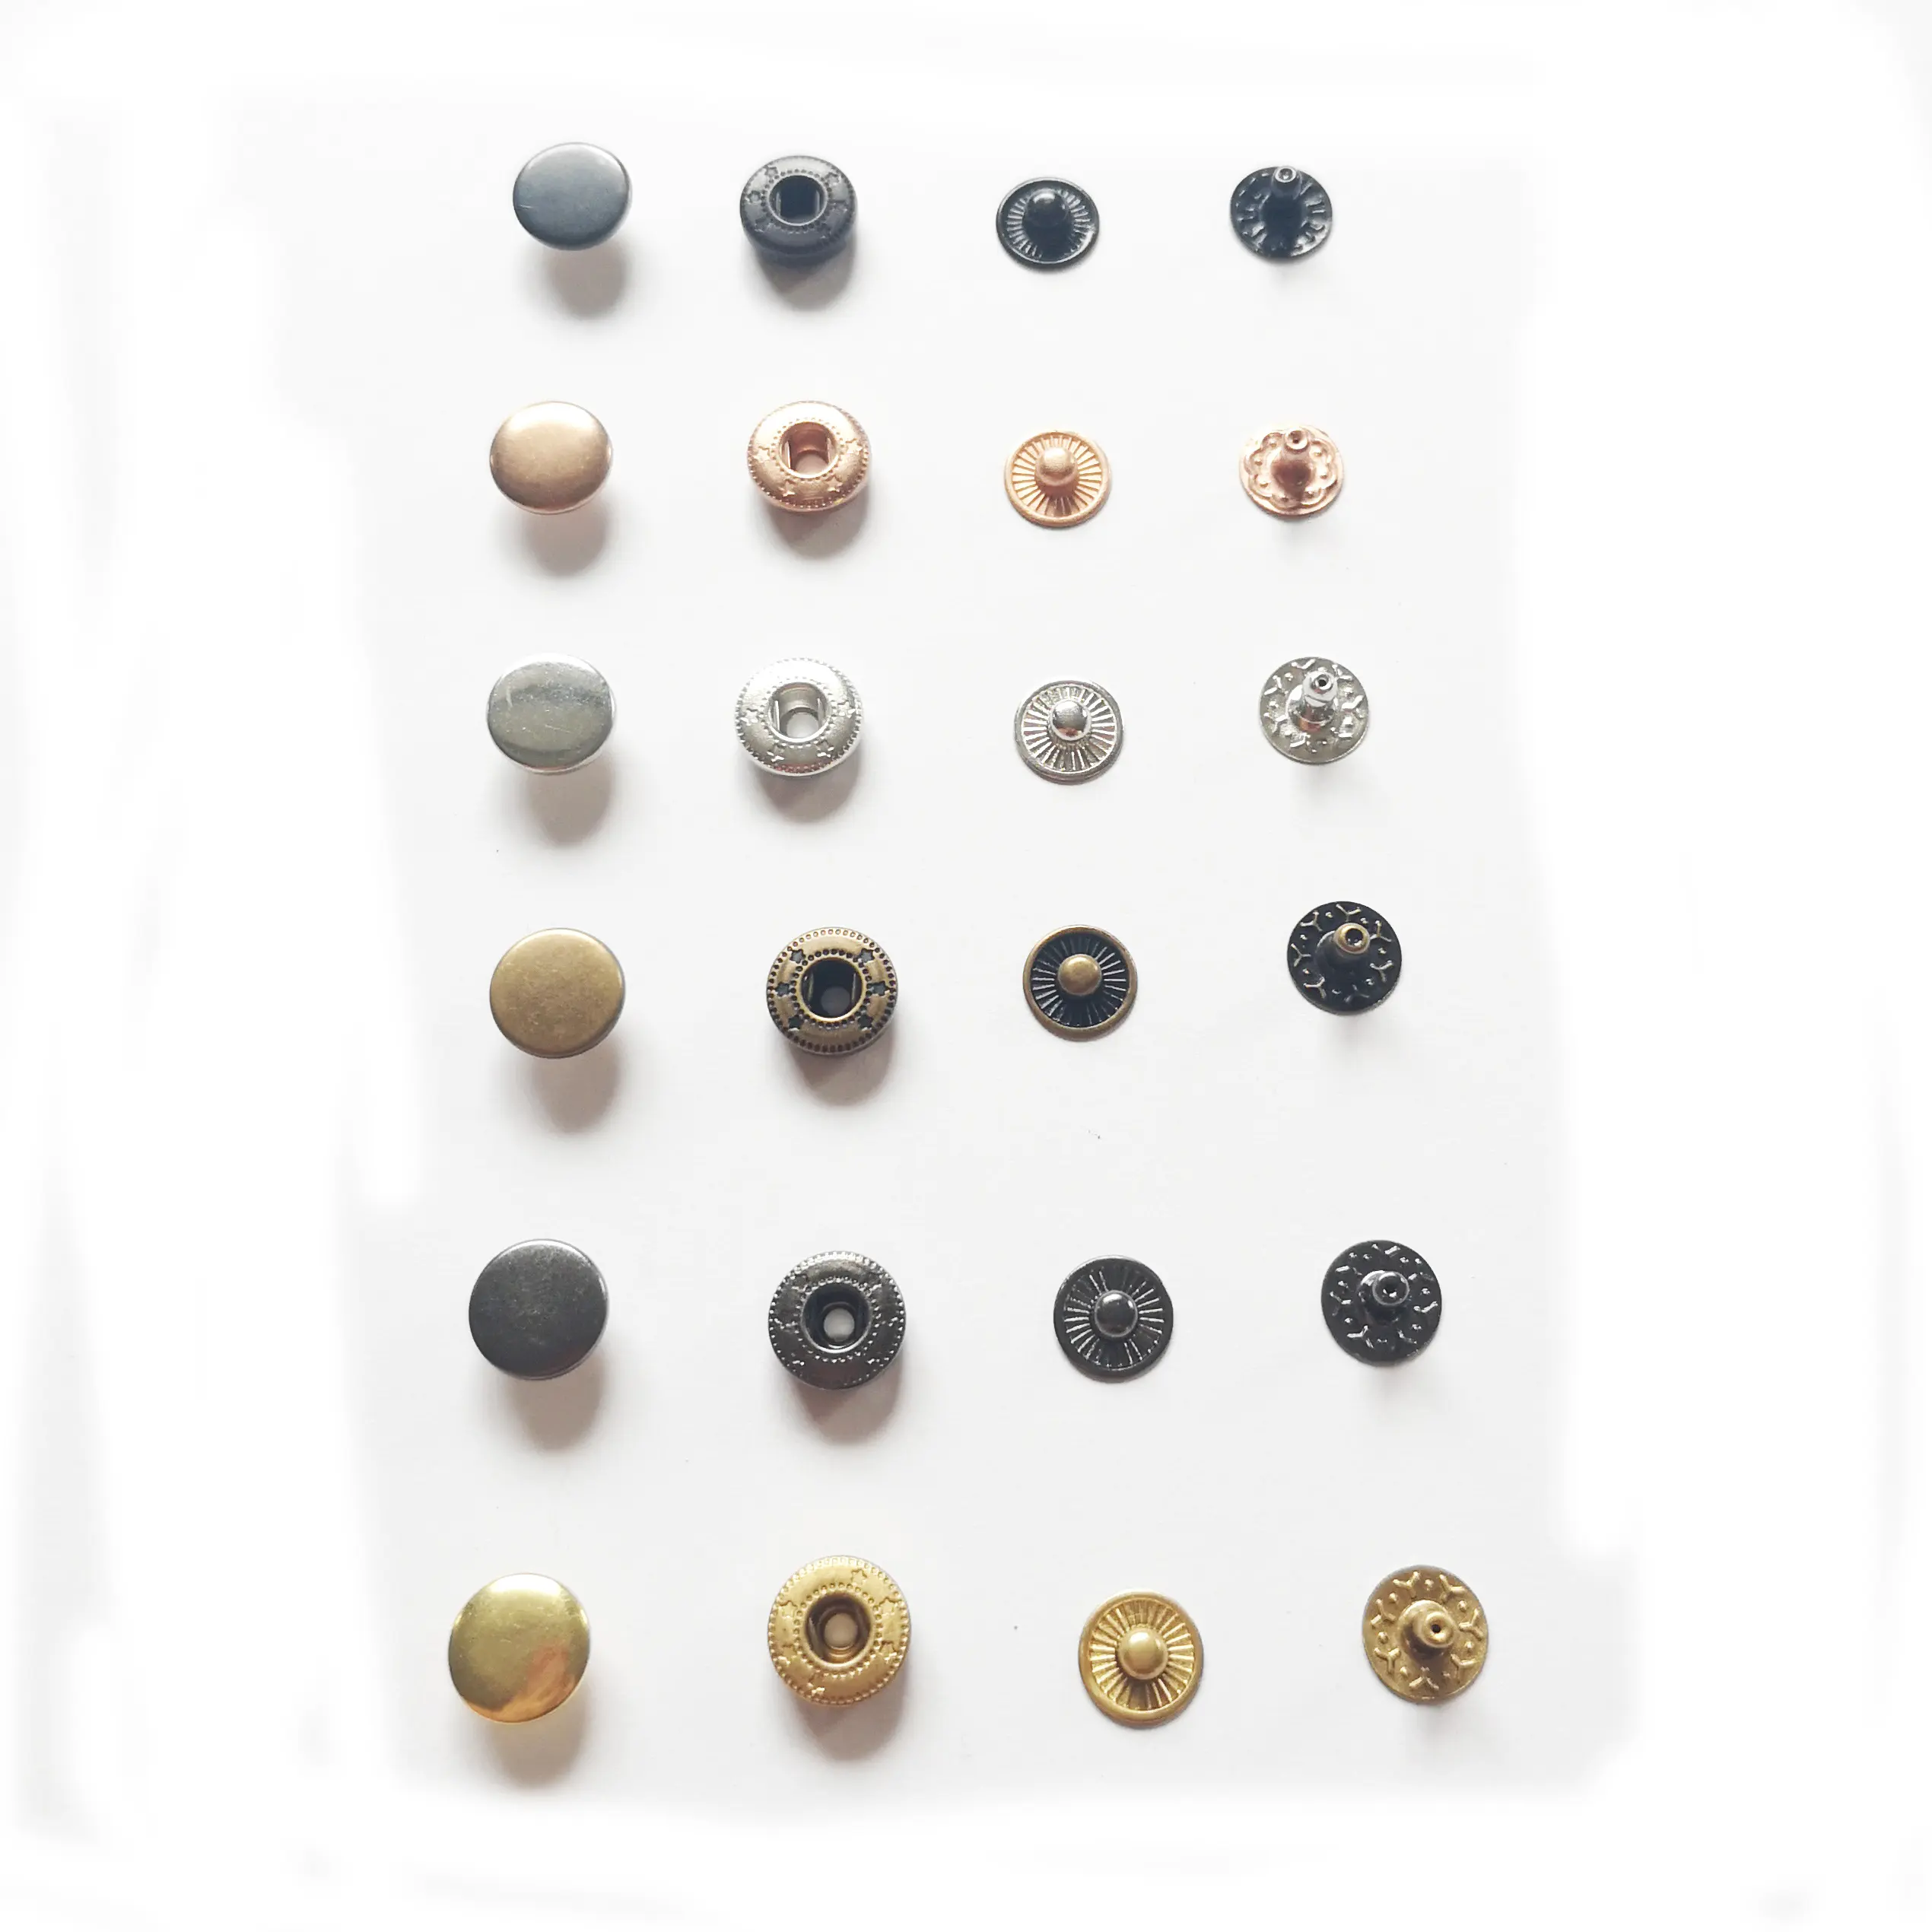 10mm brass small snap buttons for garments/bags/wallet 4 parts for a set plating to be silver or black sewing buttons